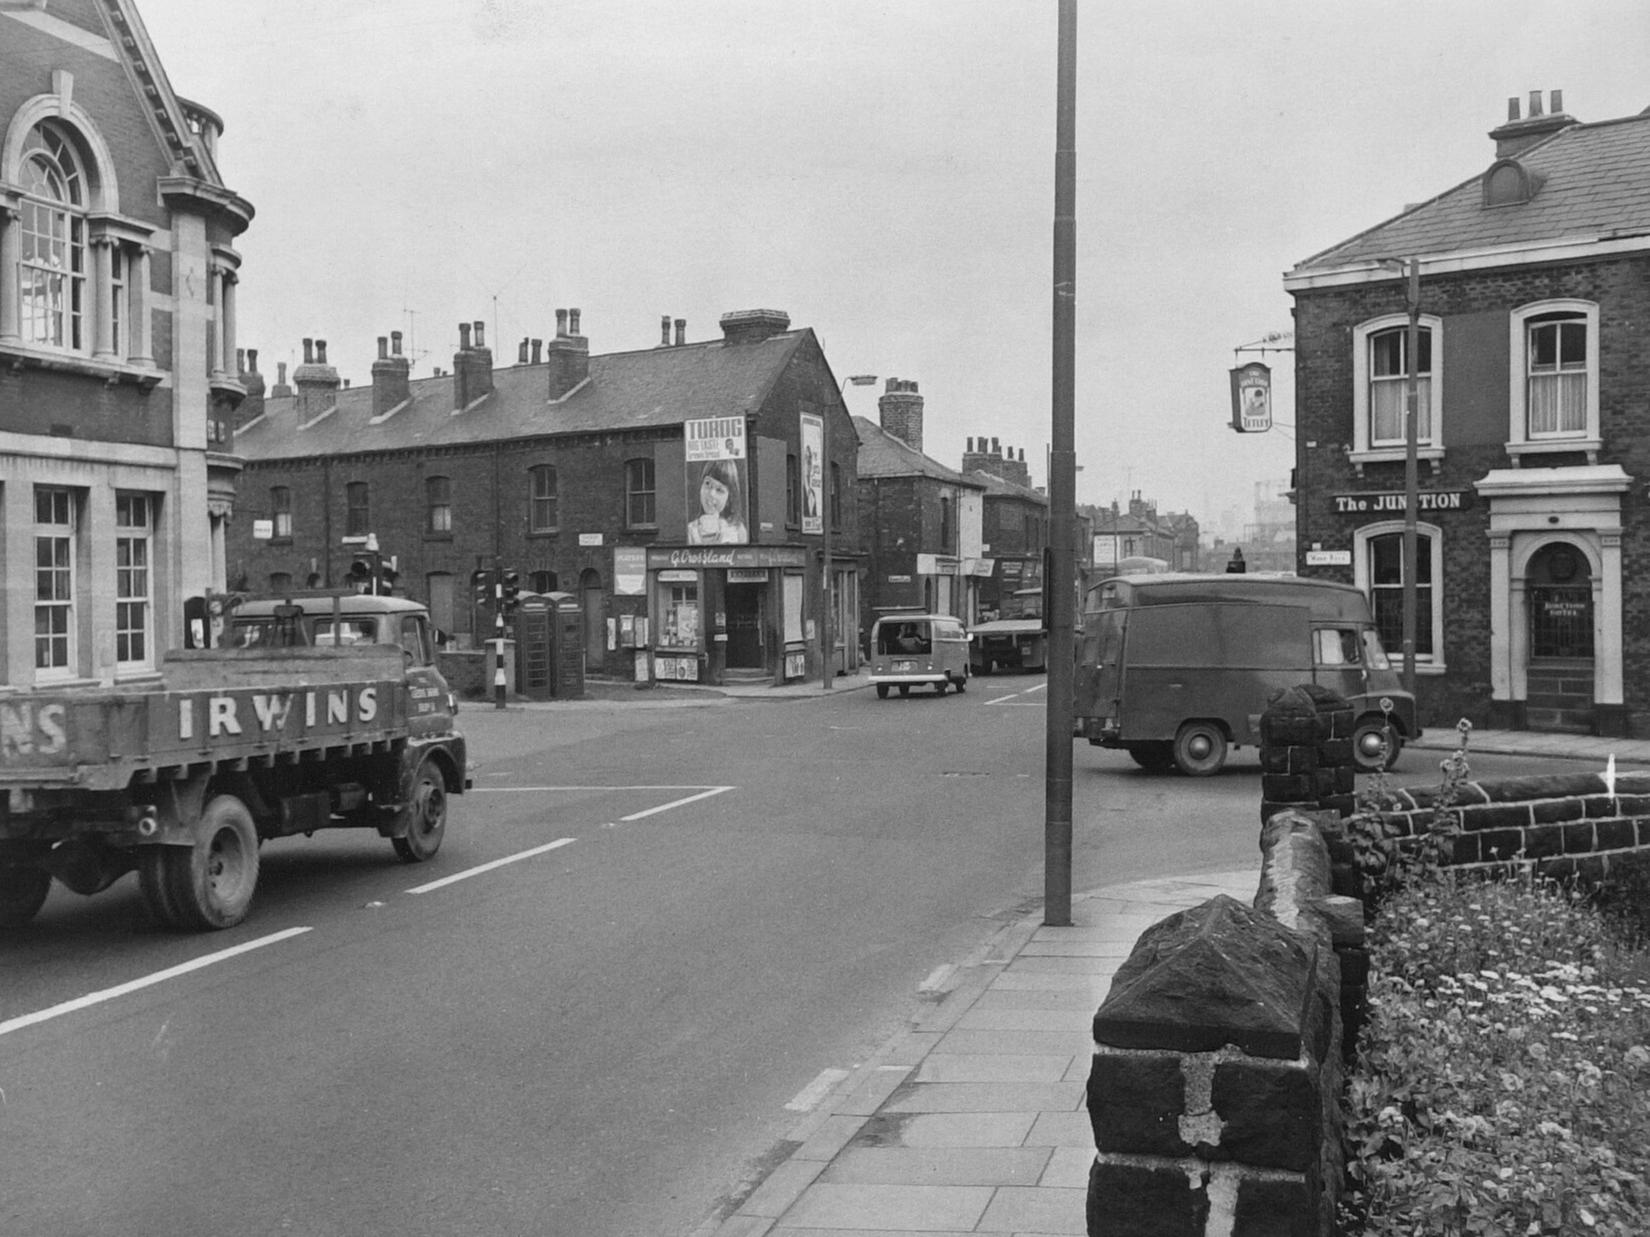 Dewsbury Road with the Moor Road and Hunslet Hall Road junctions.